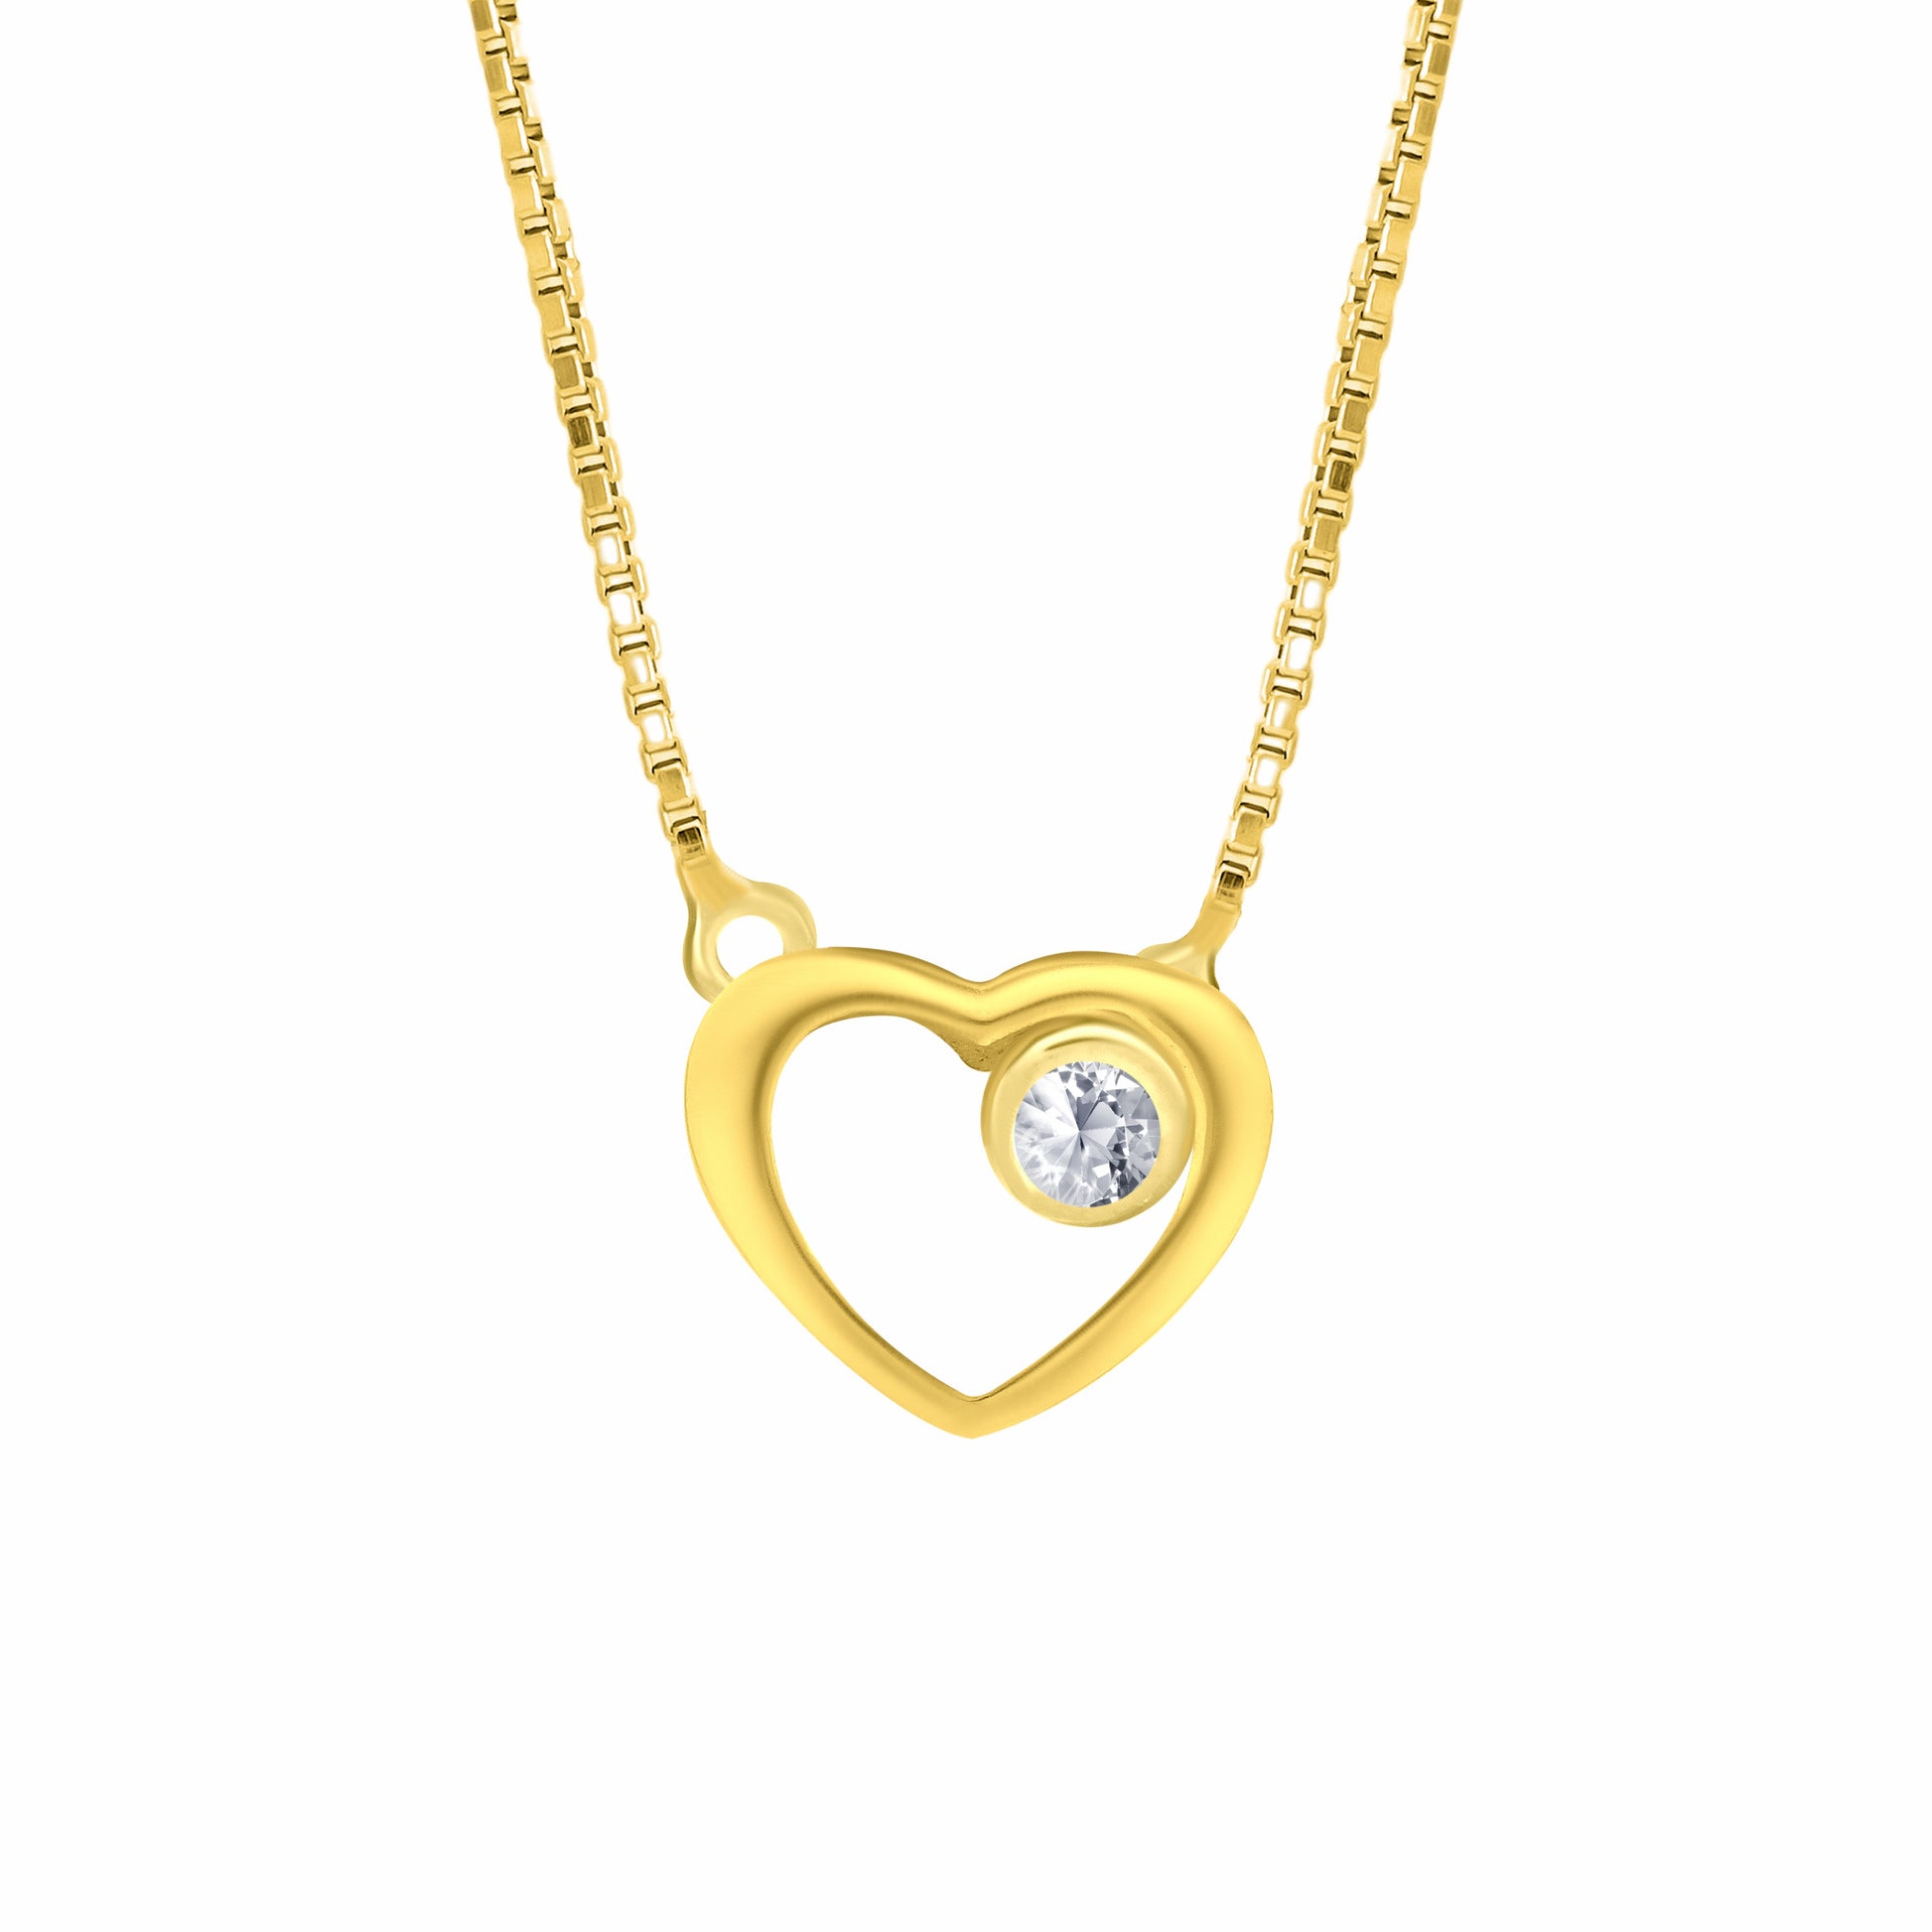 Heart Shape Gold Necklace on white background